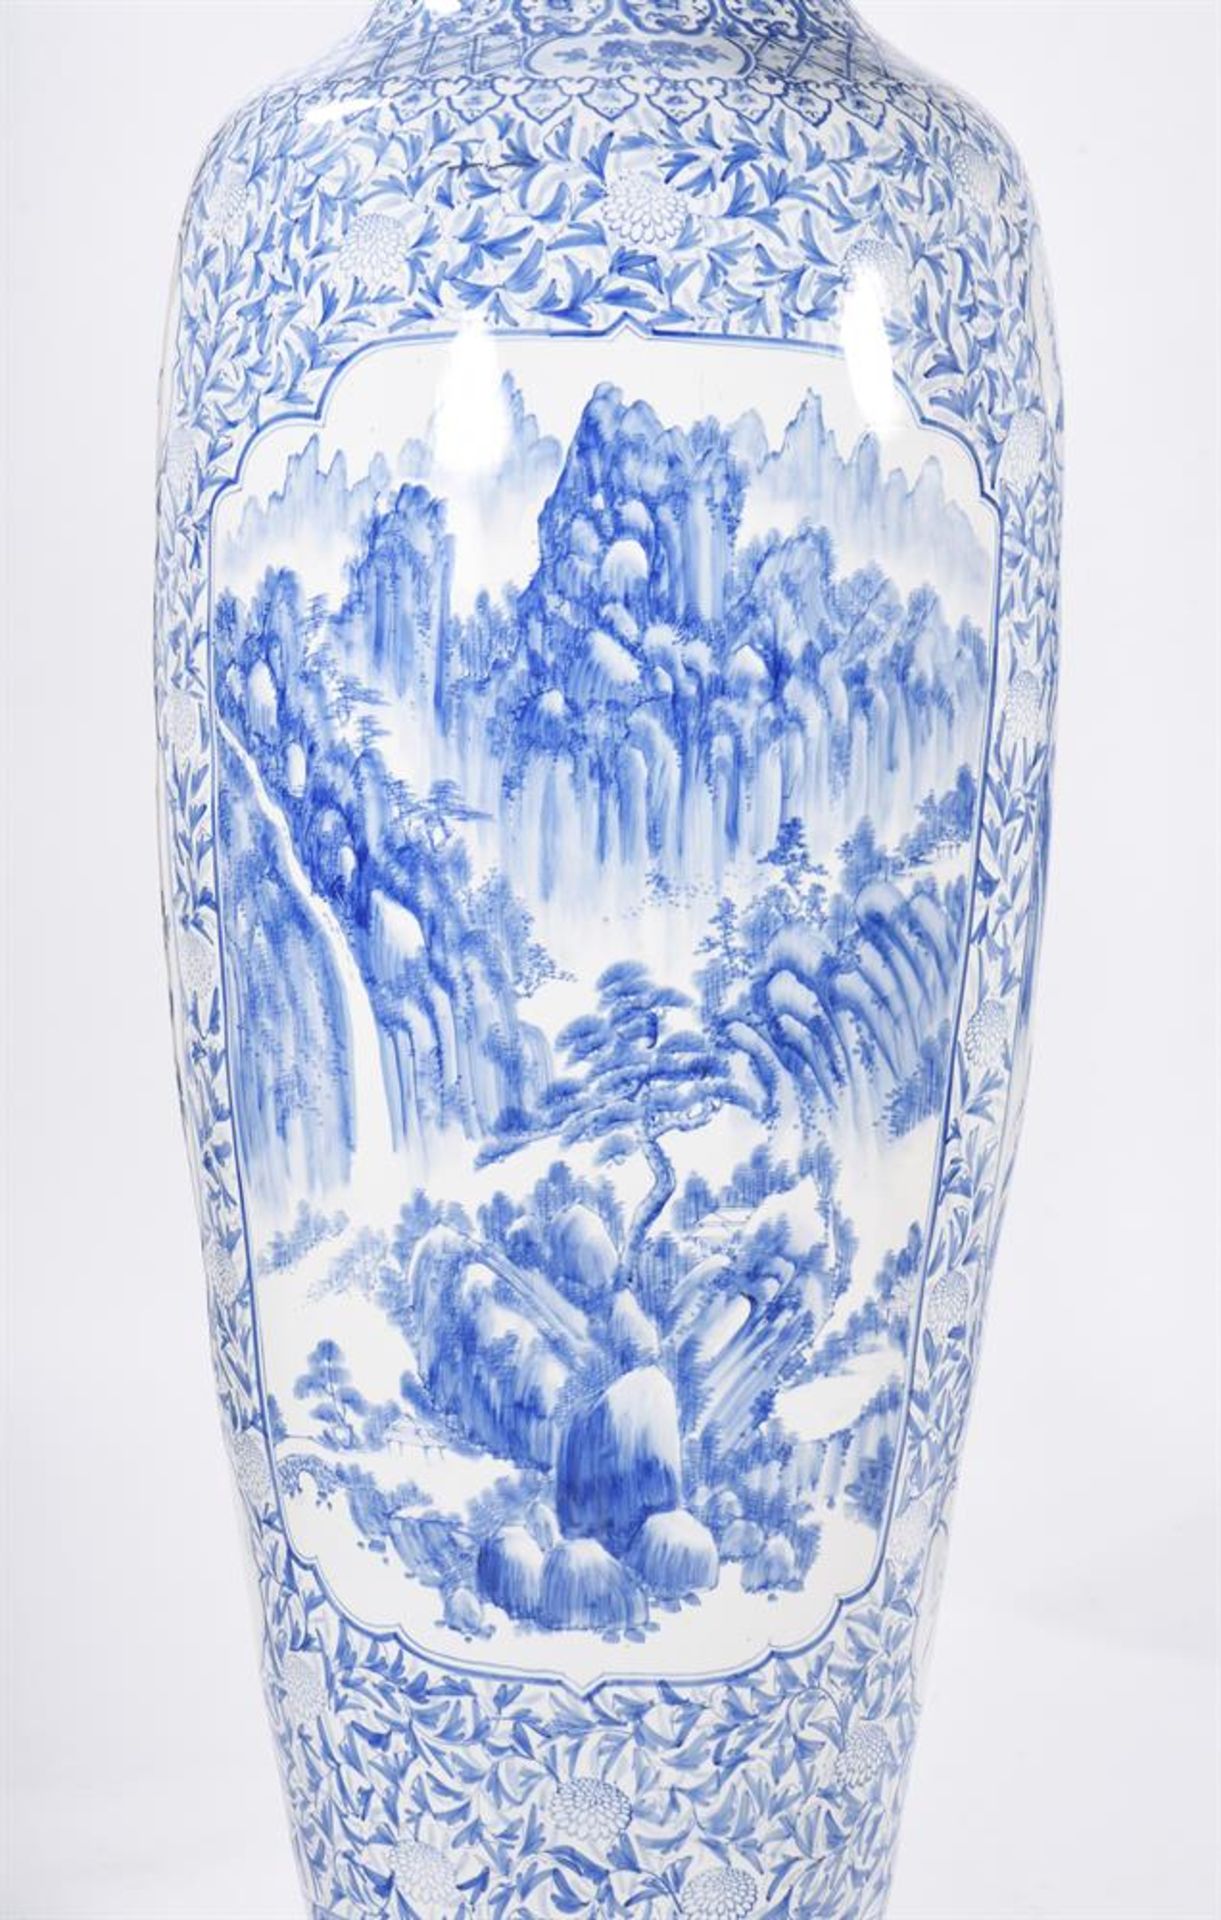 A PAIR OF MASSIVE BLUE AND WHITE PORCELAIN VASES, IN CHINESE STYLE, OF RECENT MANUFACTURE - Image 8 of 8